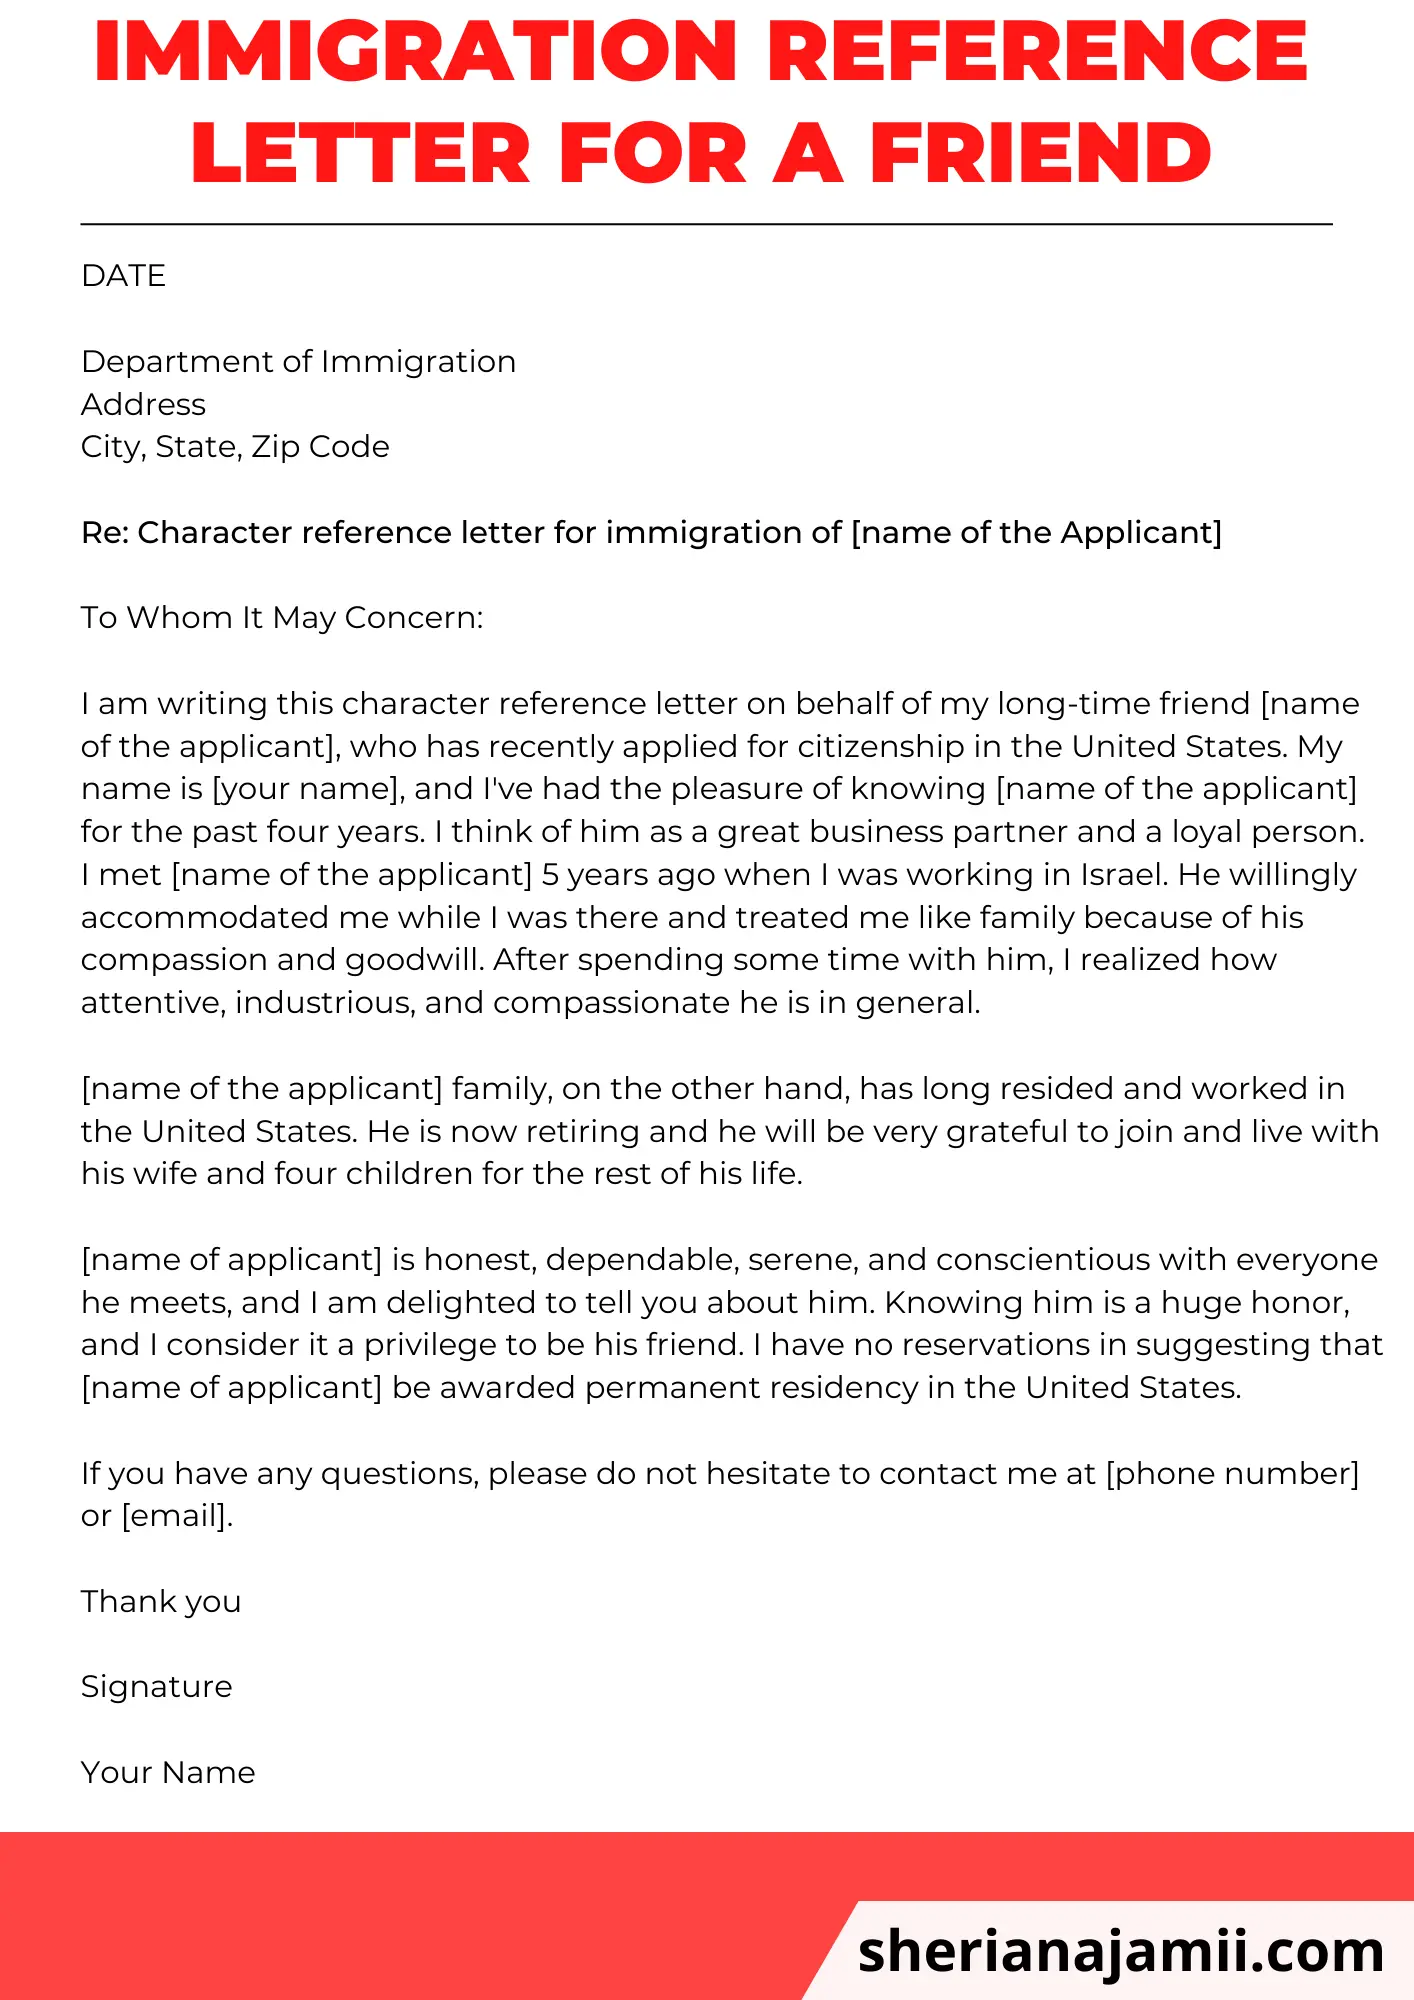 immigration-reference-letter-for-a-friend-2023-guide-5-samples